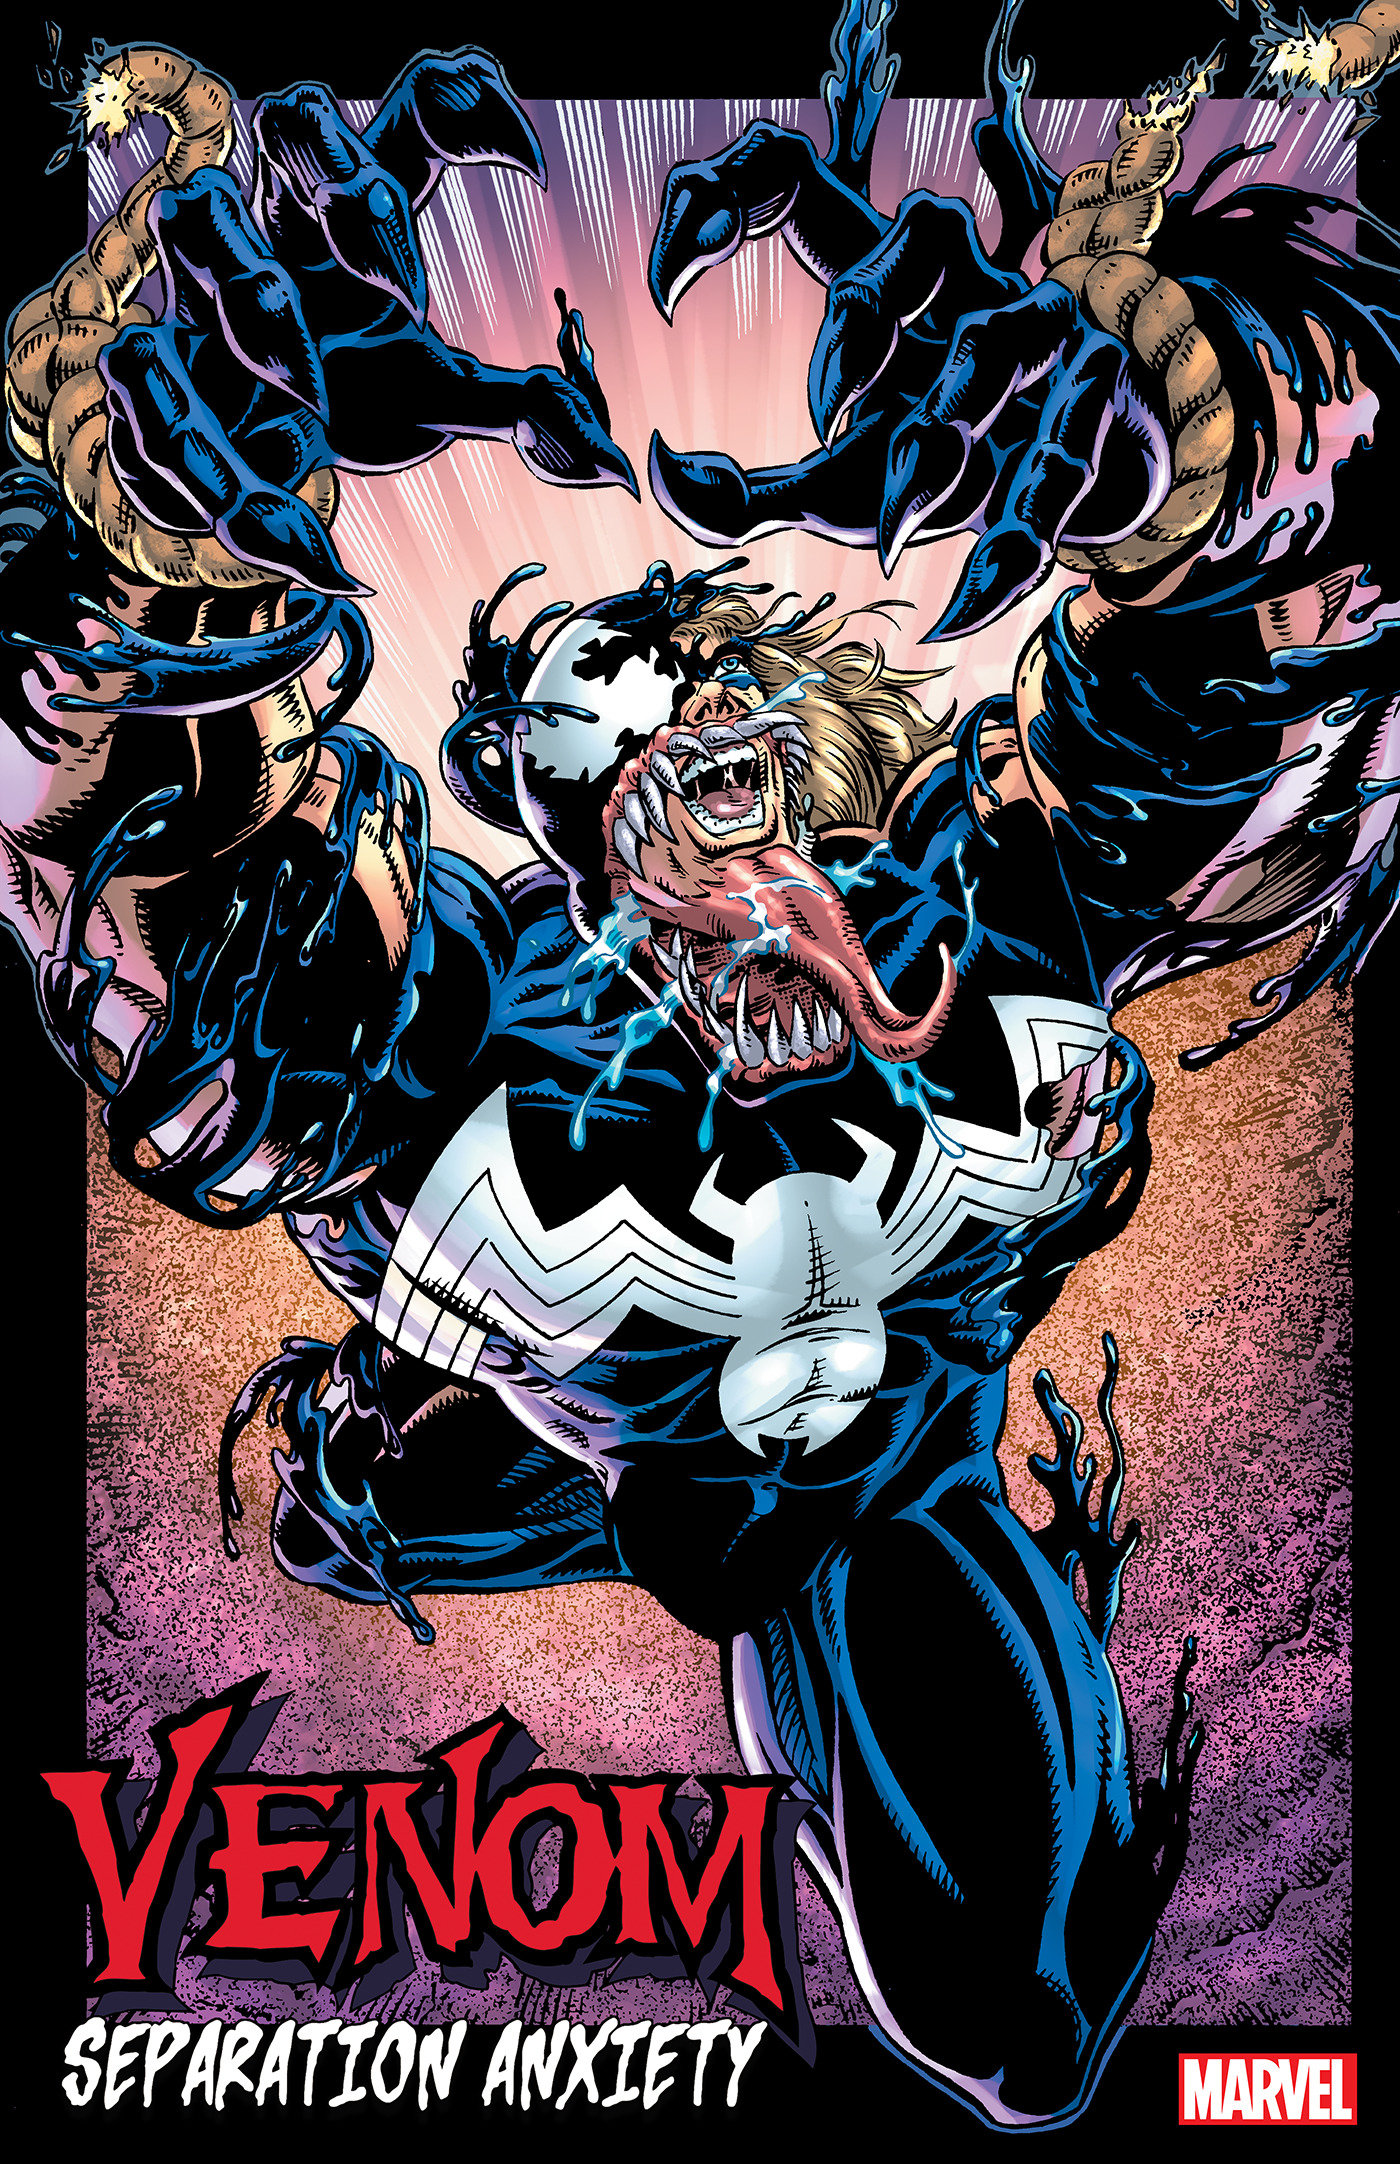 Venom: Separation Anxiety #1 1 for 50 Incentive Randall Remastered Variant